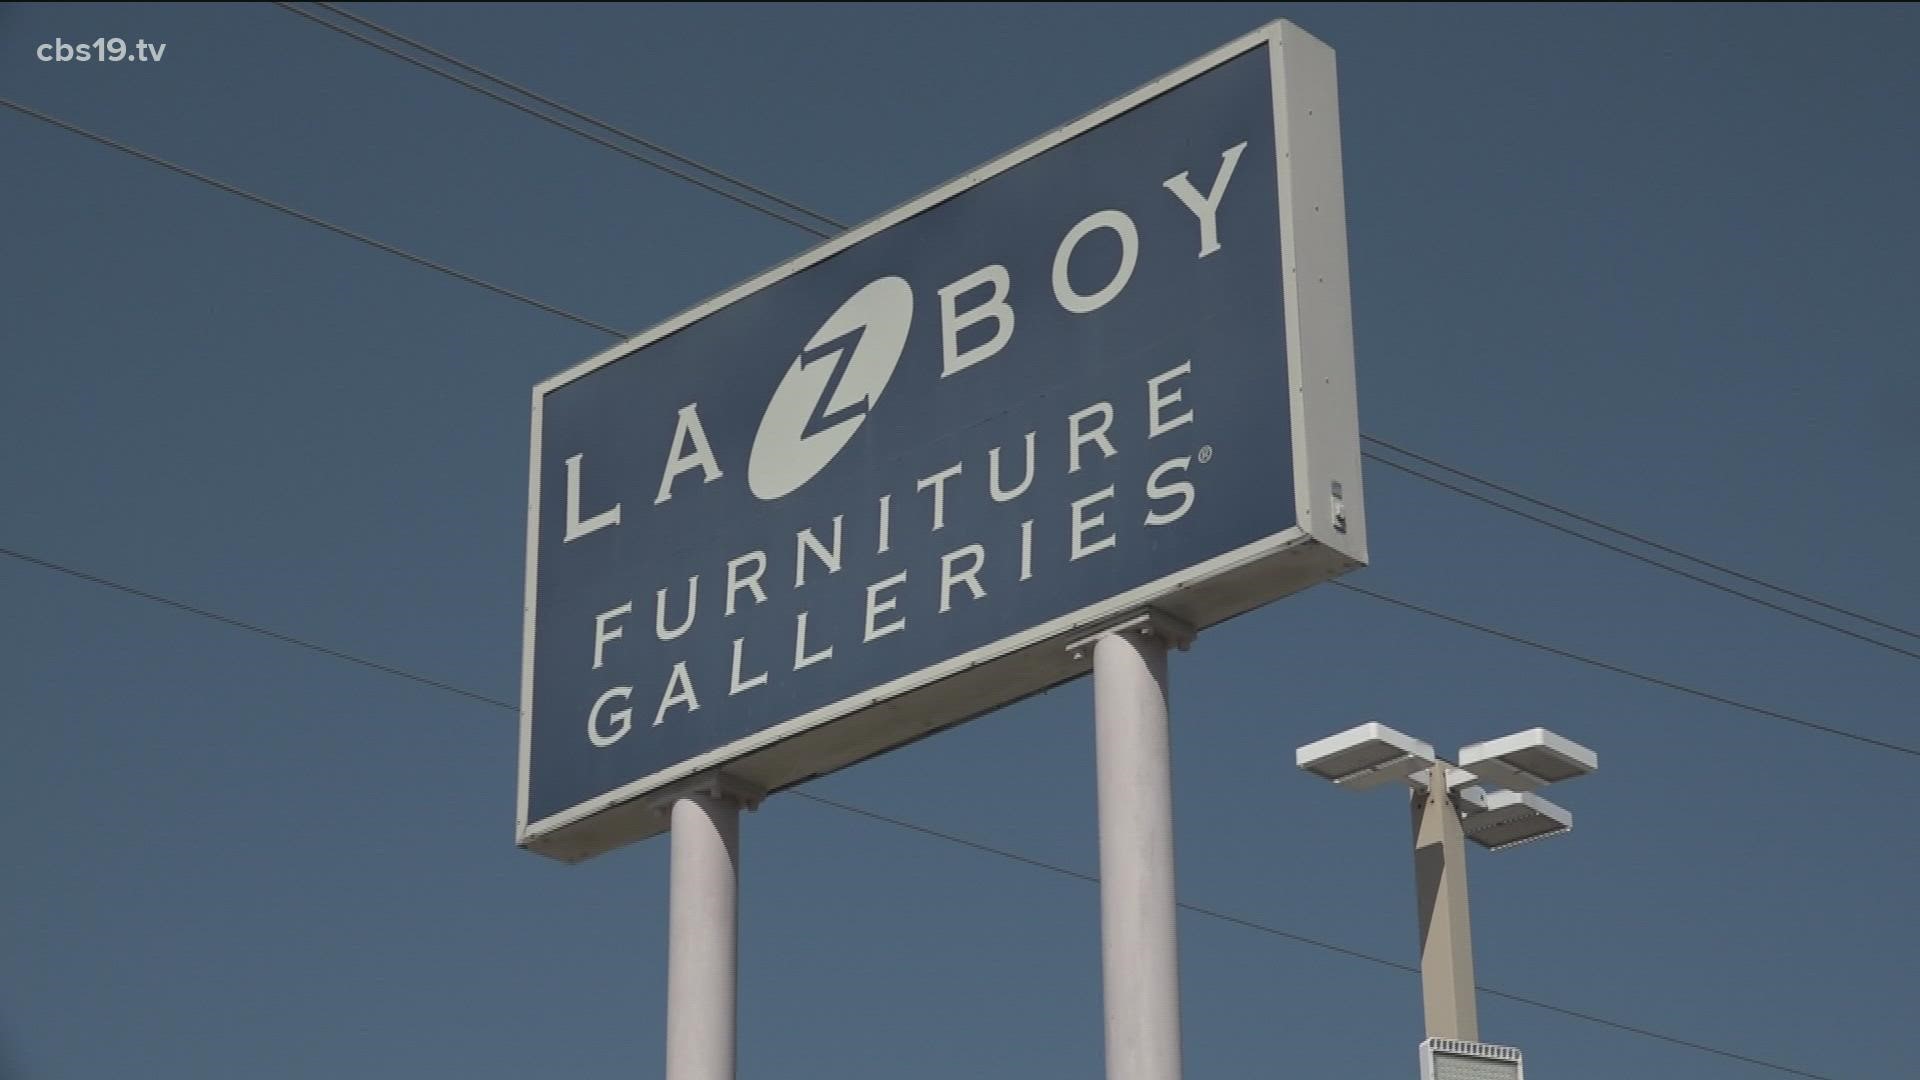 LaZBoy Furniture Galleries, at 1219 W. Loop 281 in Longview, and 6000 S. Broadway Ave. in Tyler, will each be holding a huge "everything must go" retirement sale.